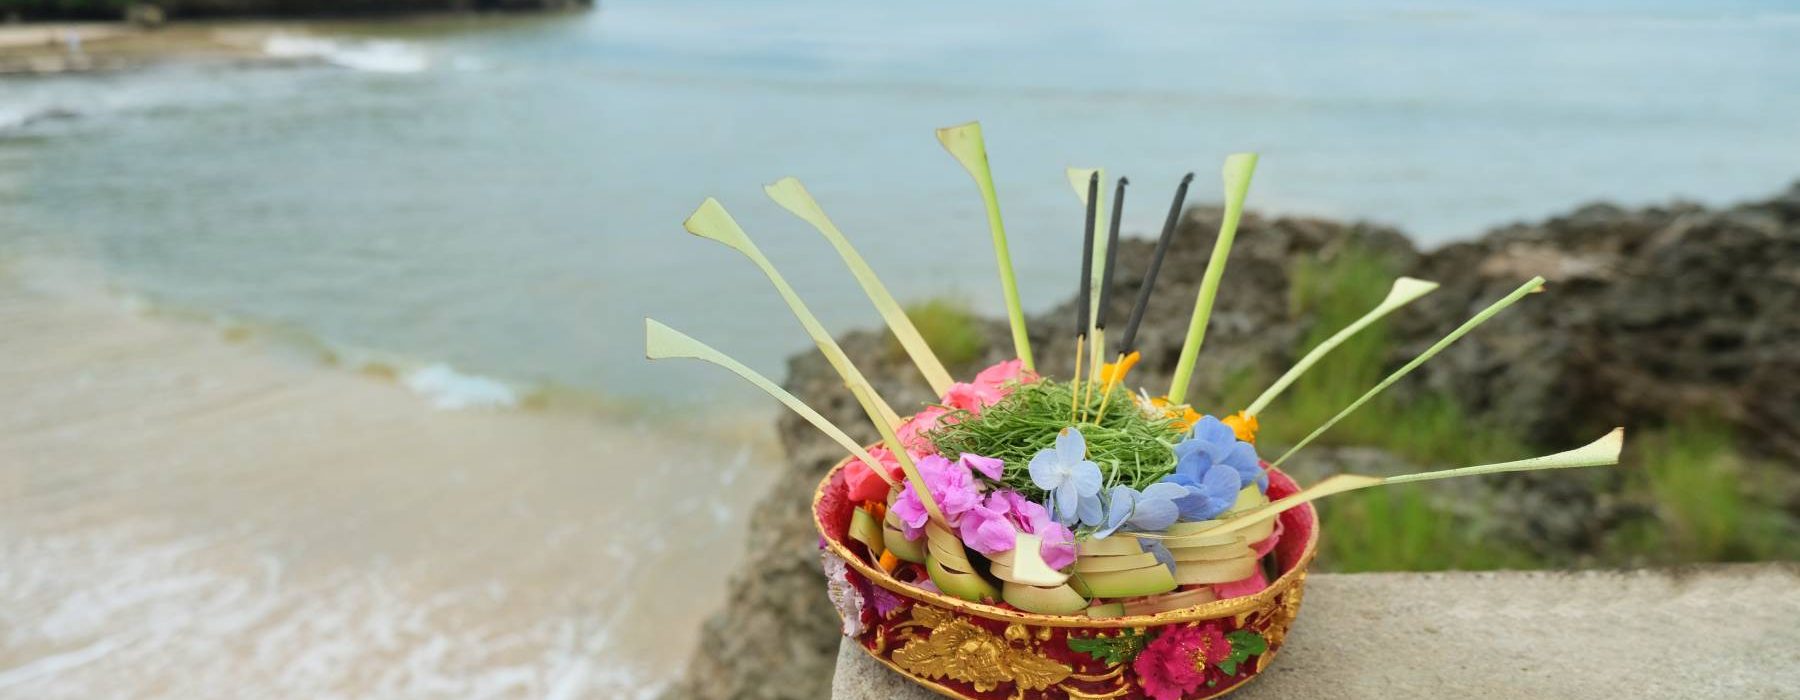 Raffles Bali - Balinese Offering Meaning and Elements